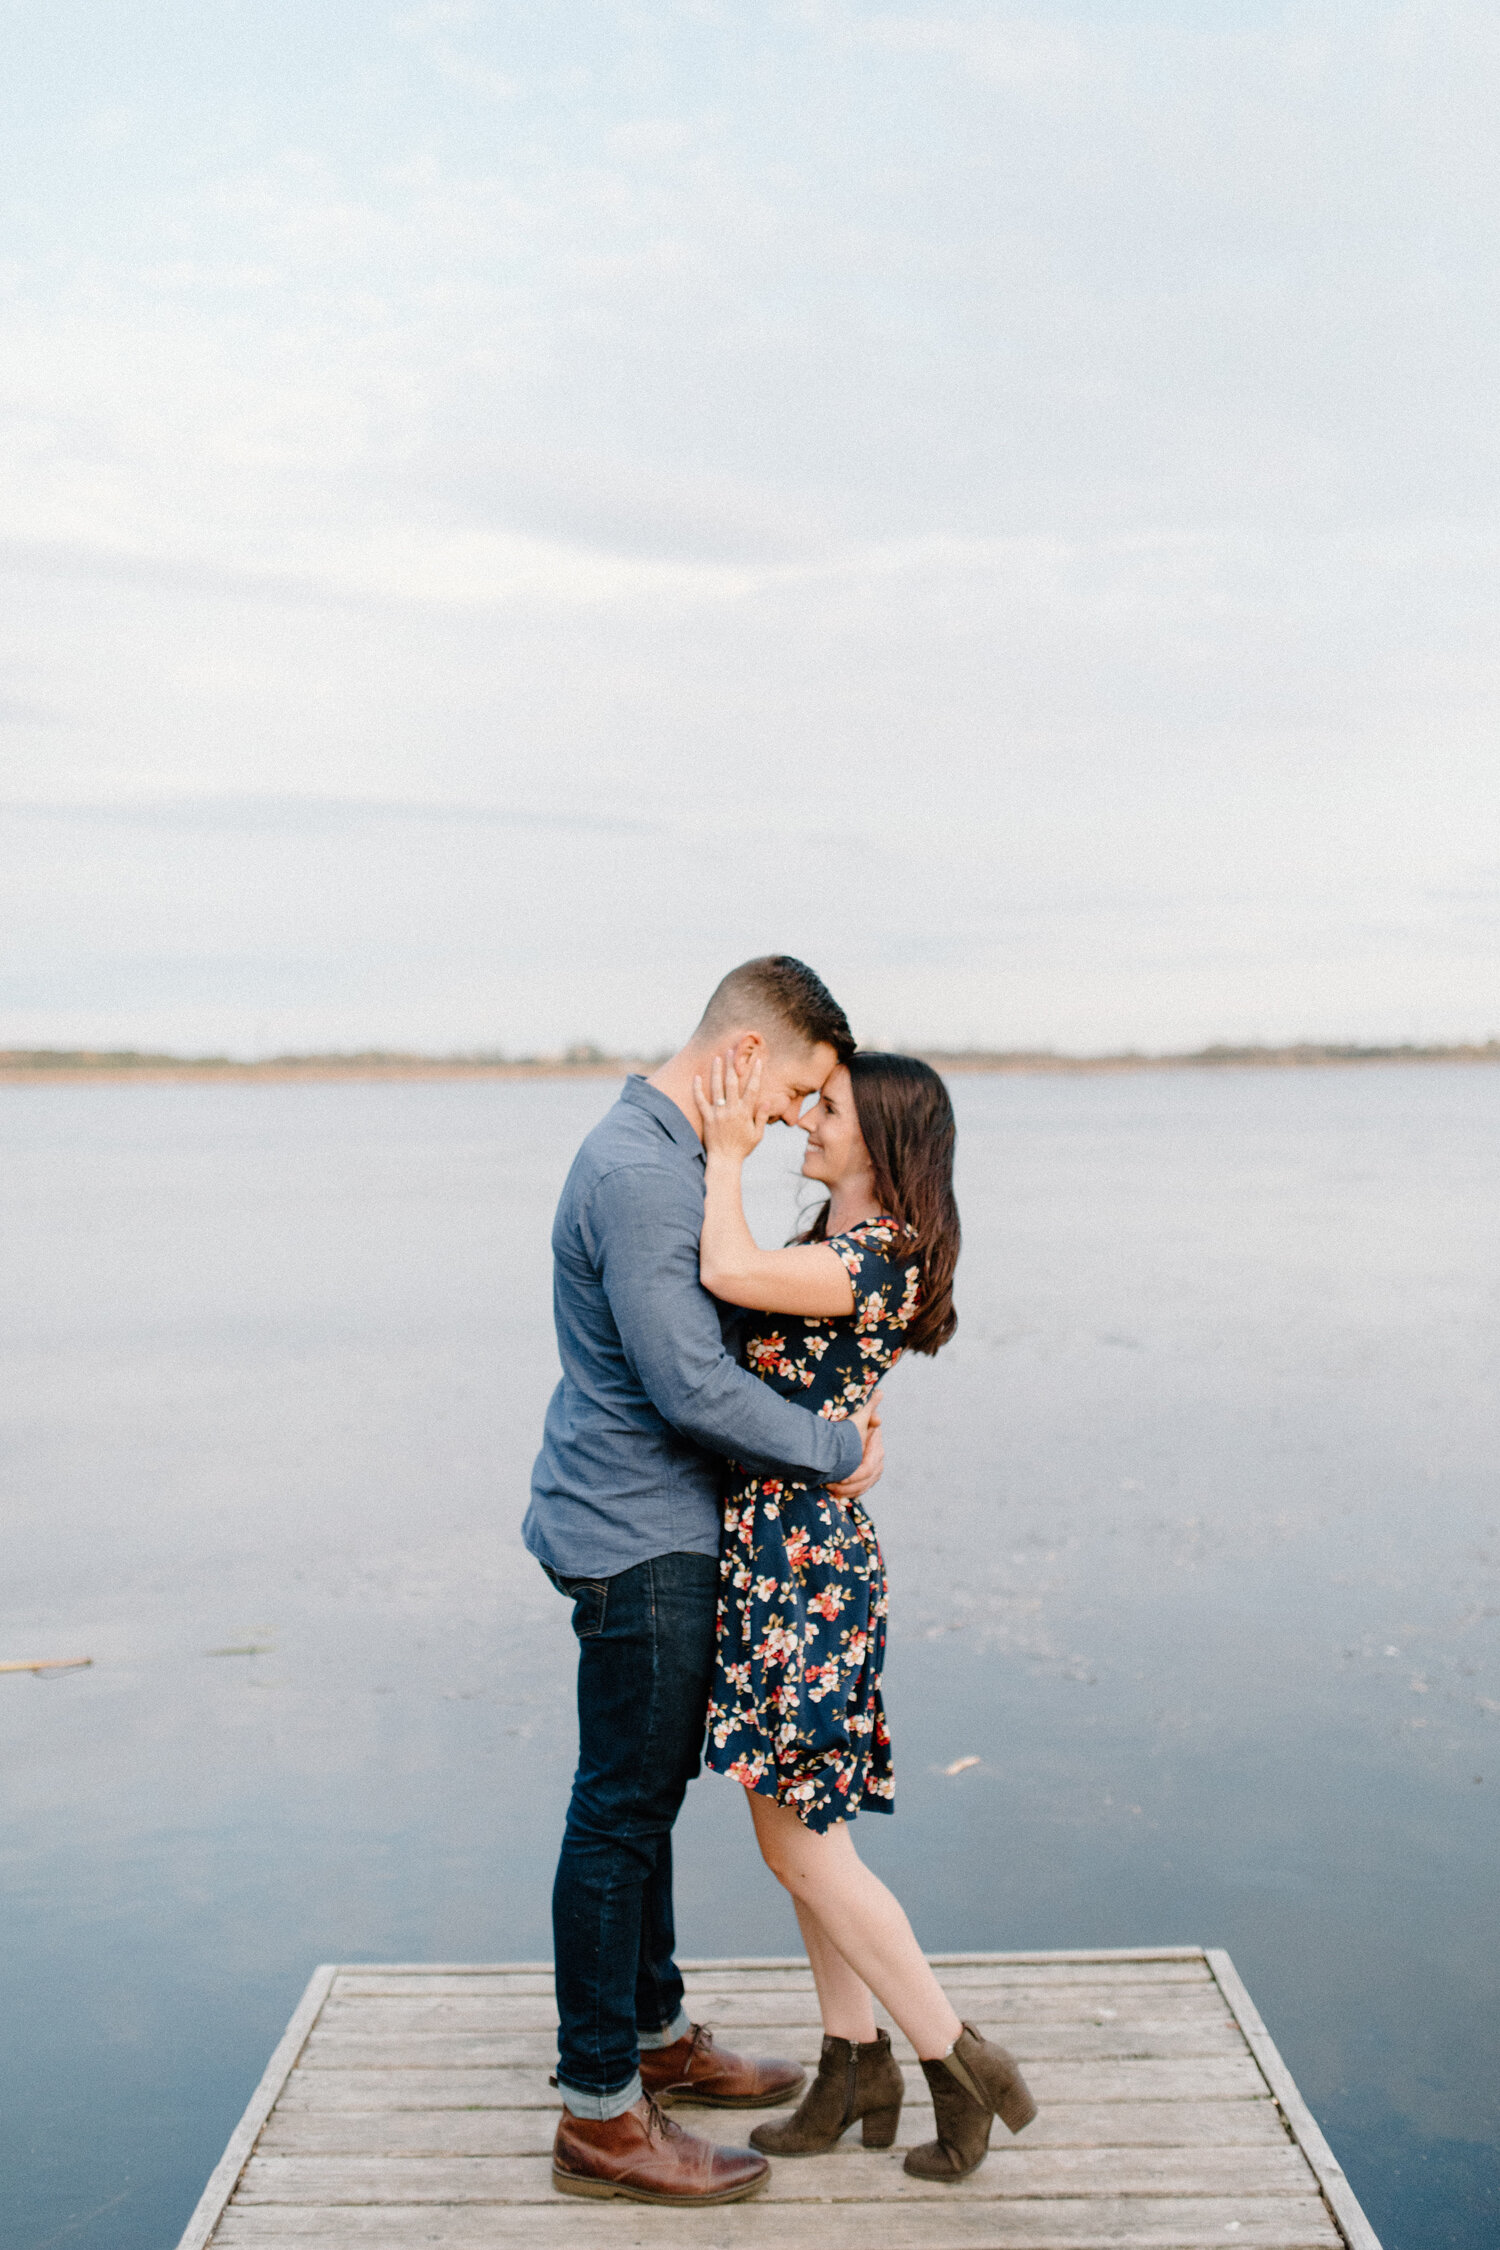  Chelsea Mason Photography captures this couple holding one another’s faces romantically on a pier in Brockville, Ontario. water pier engagement session wooden dock mens dark wash levi jeans with dark leather oiled shoes womens high low floral dress 